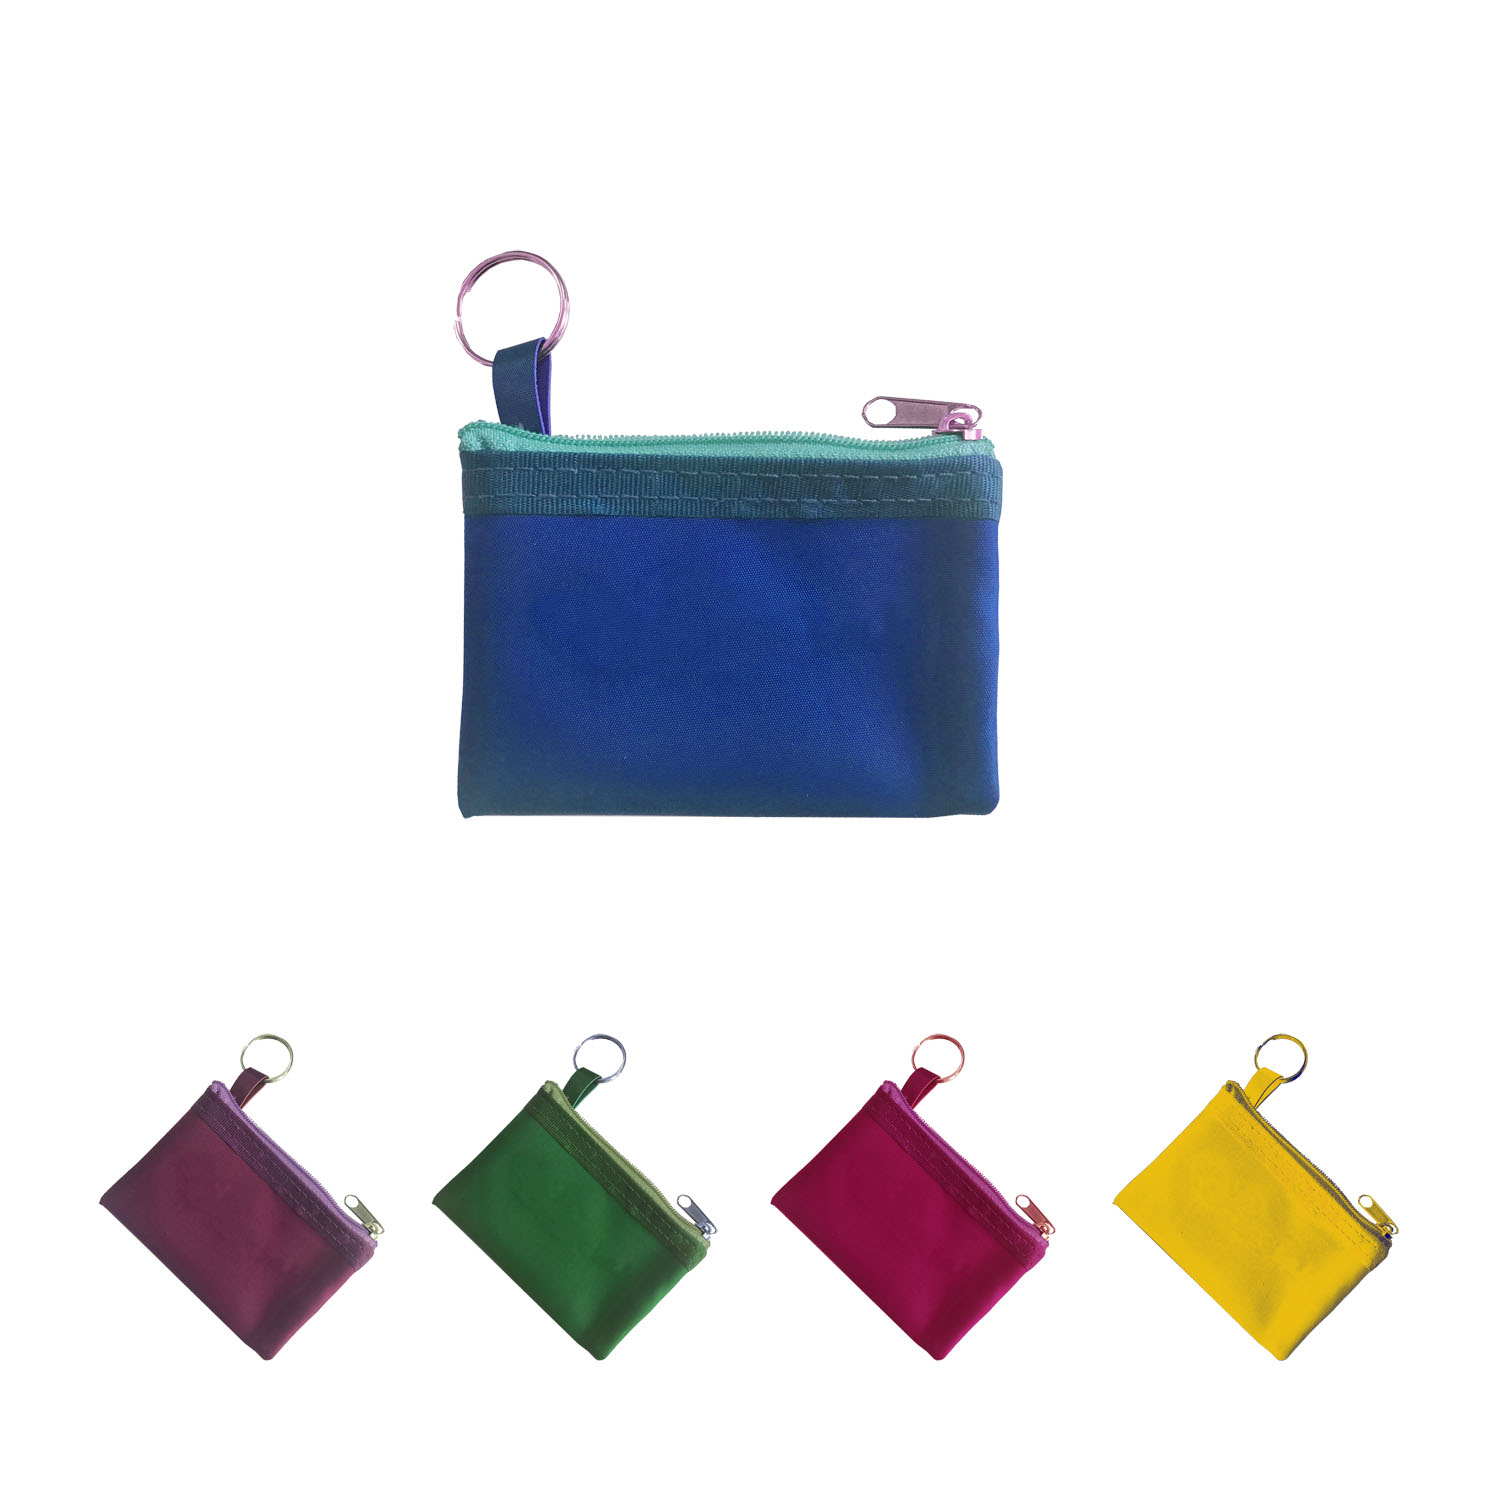 GL-AAT1043 4inx3in Nylon Pouch with Key Ring